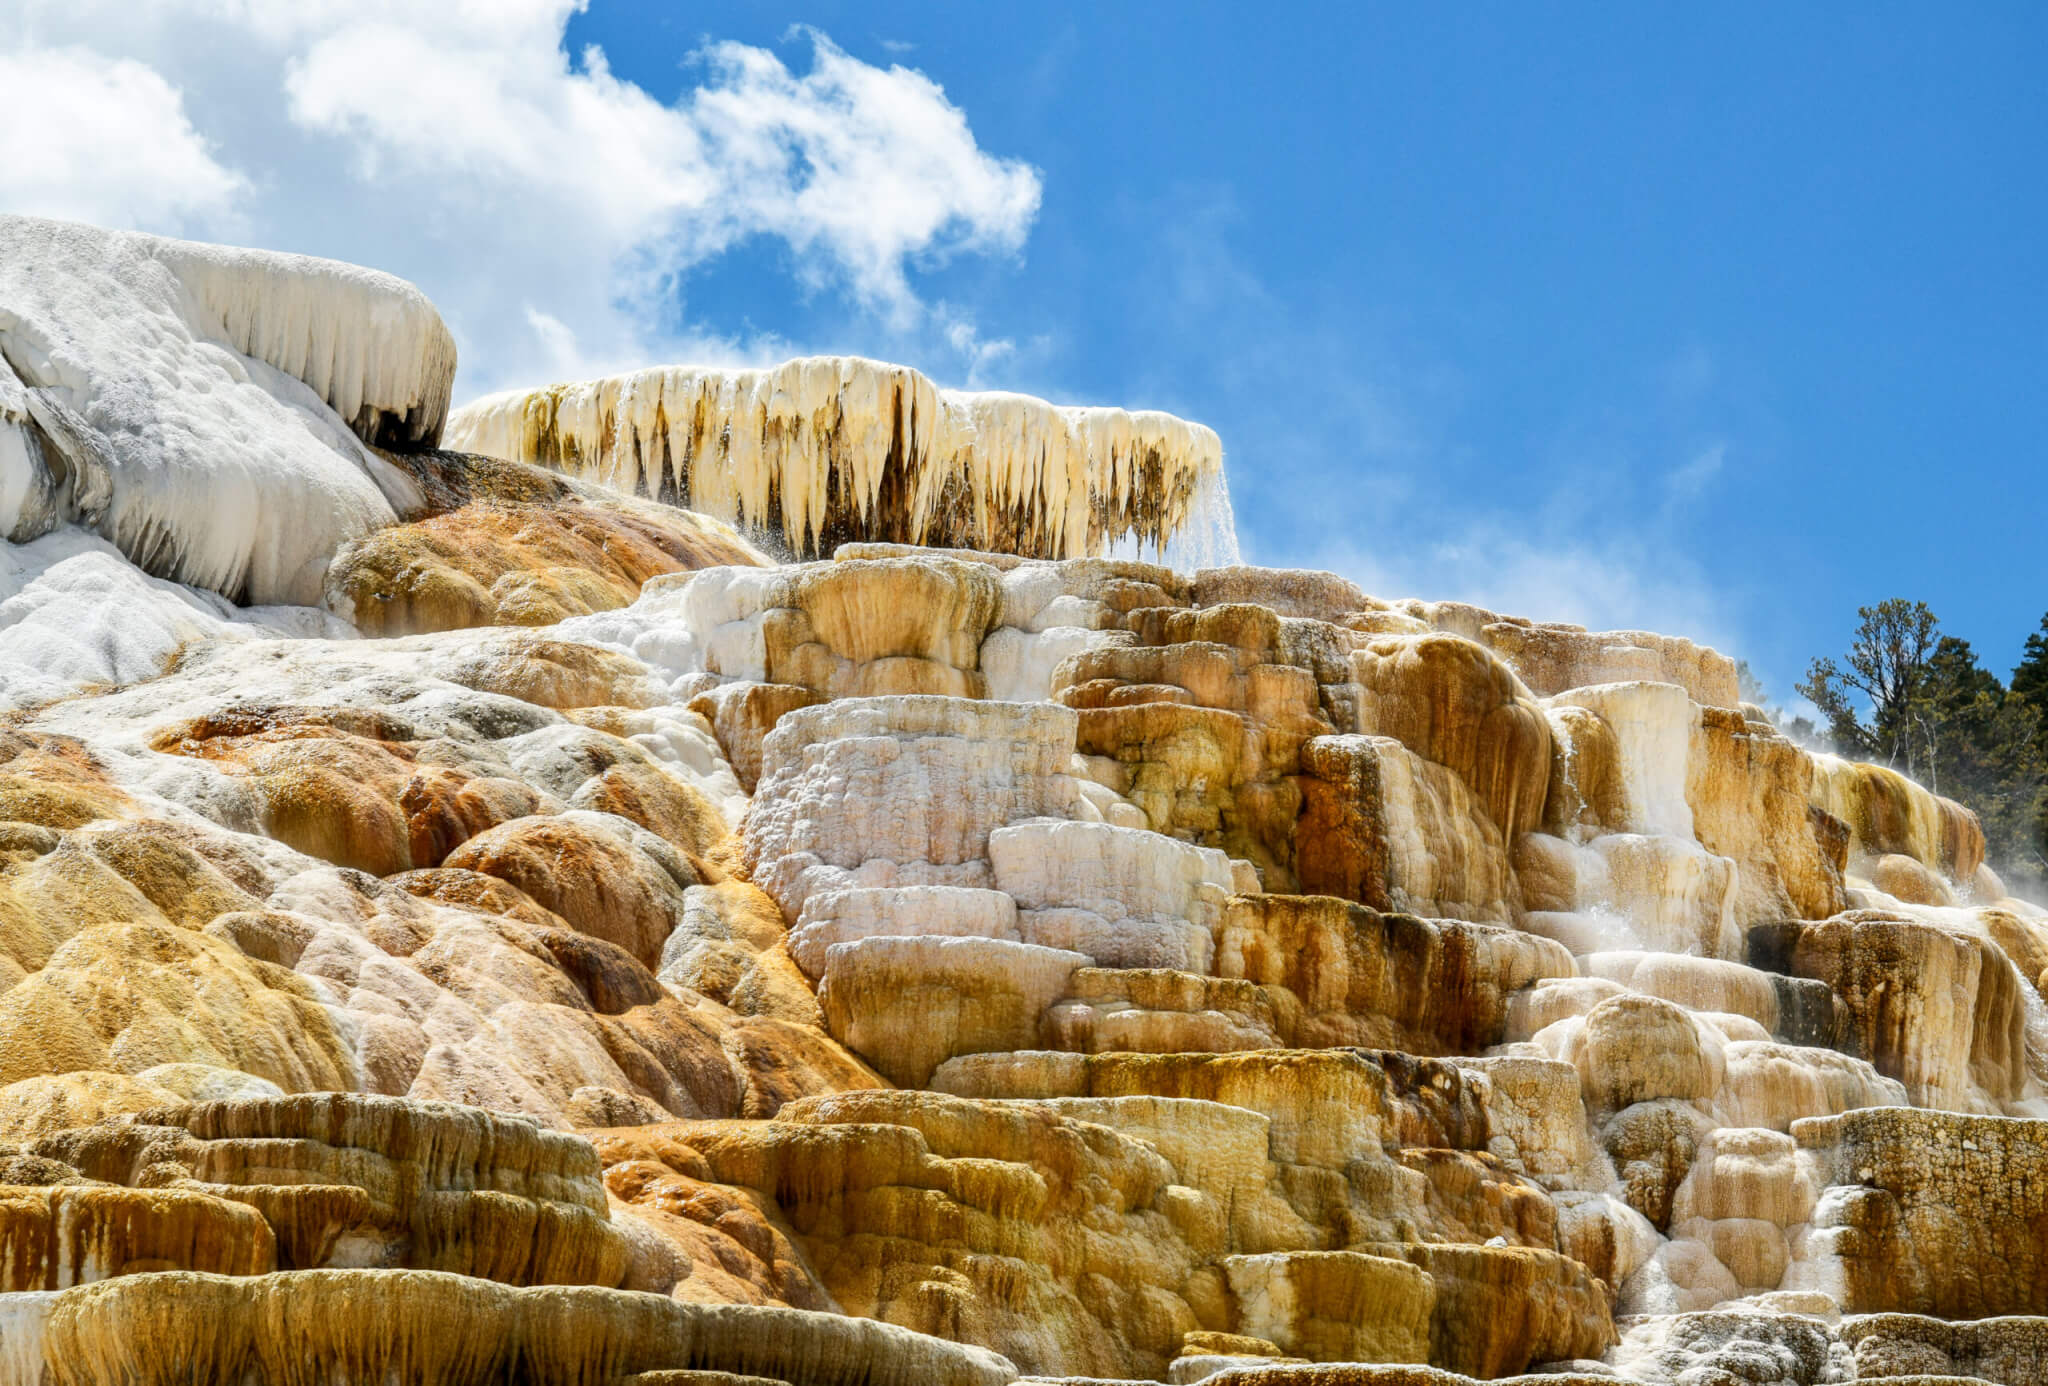 The mammoth hot springs in yellowstone park